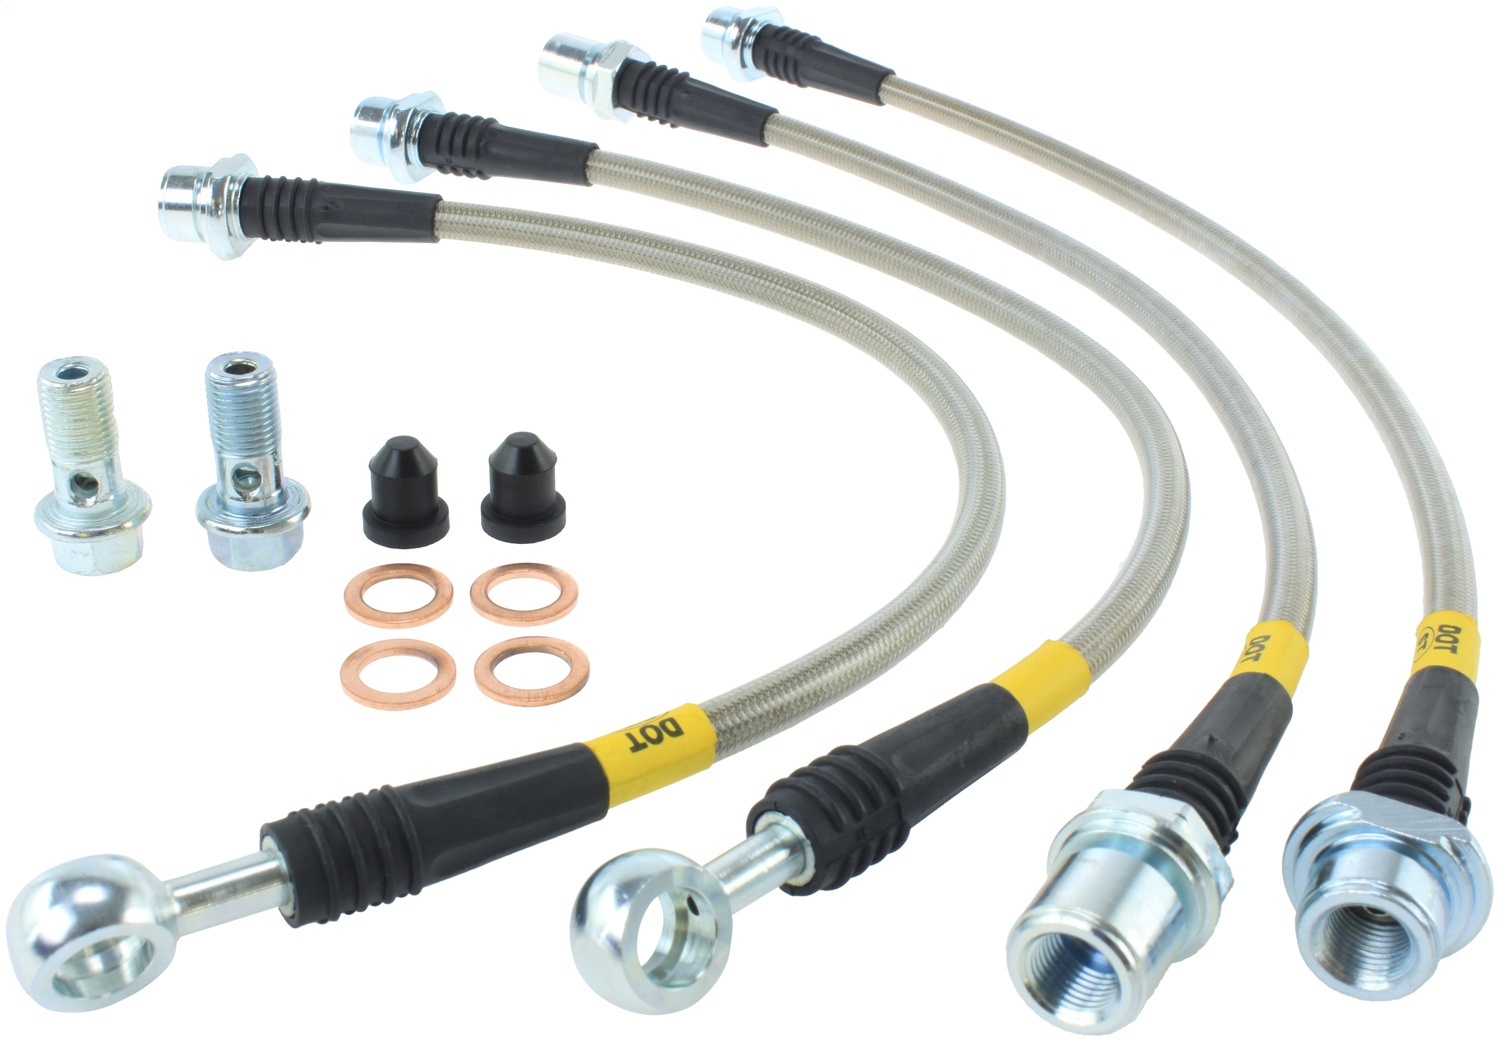 StopTech 950.44519 Stainless Steel Hose Set Fits 07-20 Land Cruiser LX570 Tundra